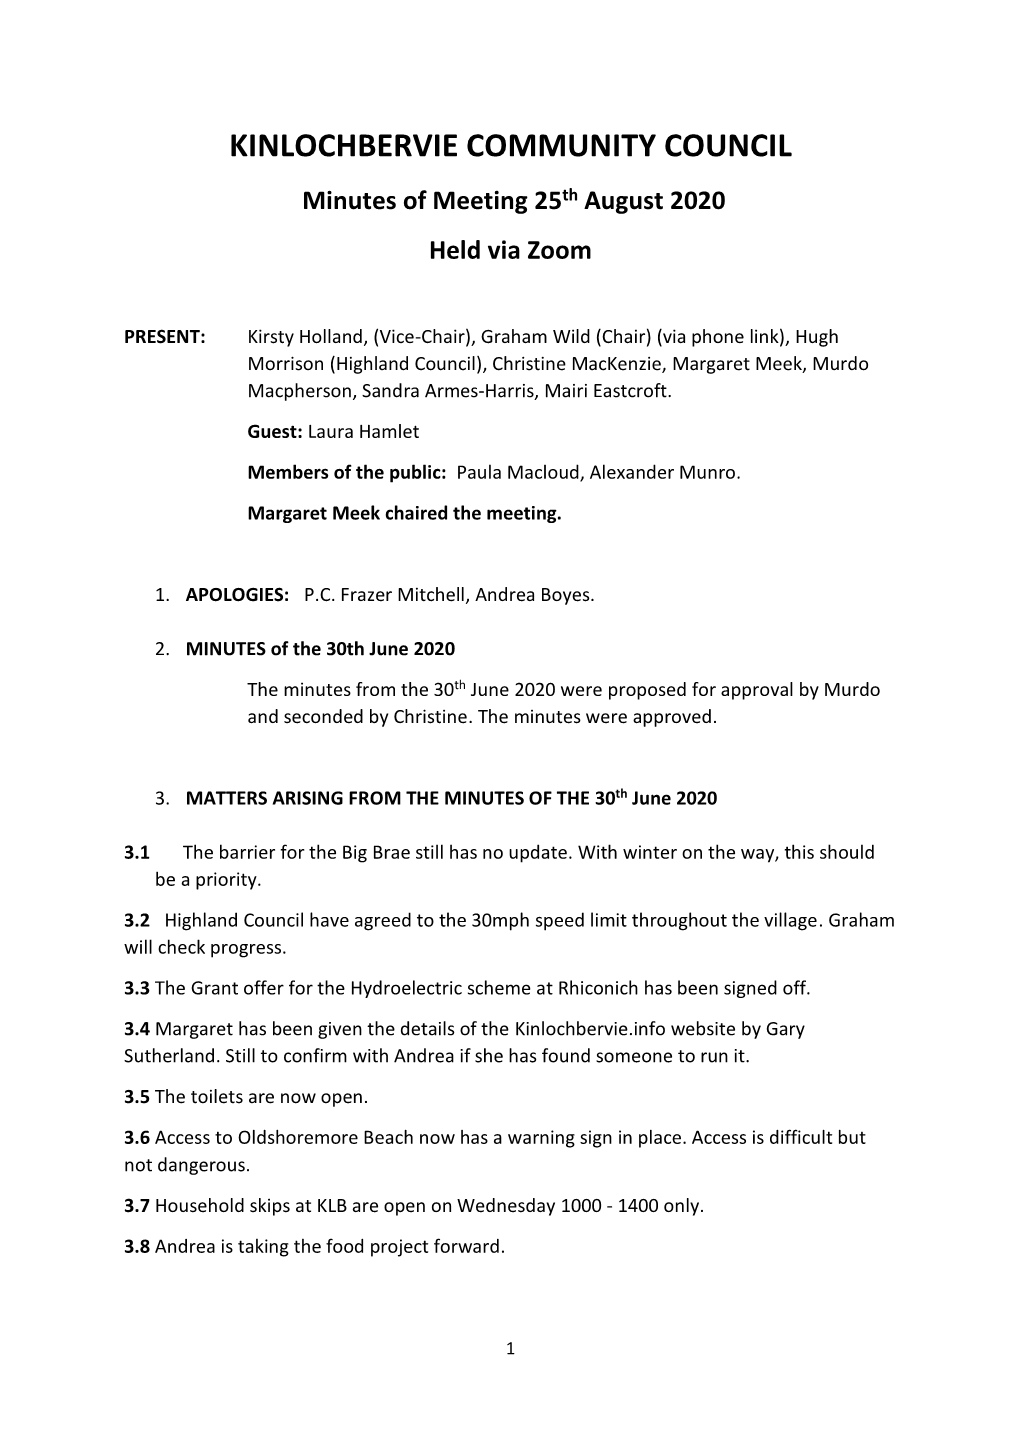 KINLOCHBERVIE COMMUNITY COUNCIL Minutes of Meeting 25Th August 2020 Held Via Zoom